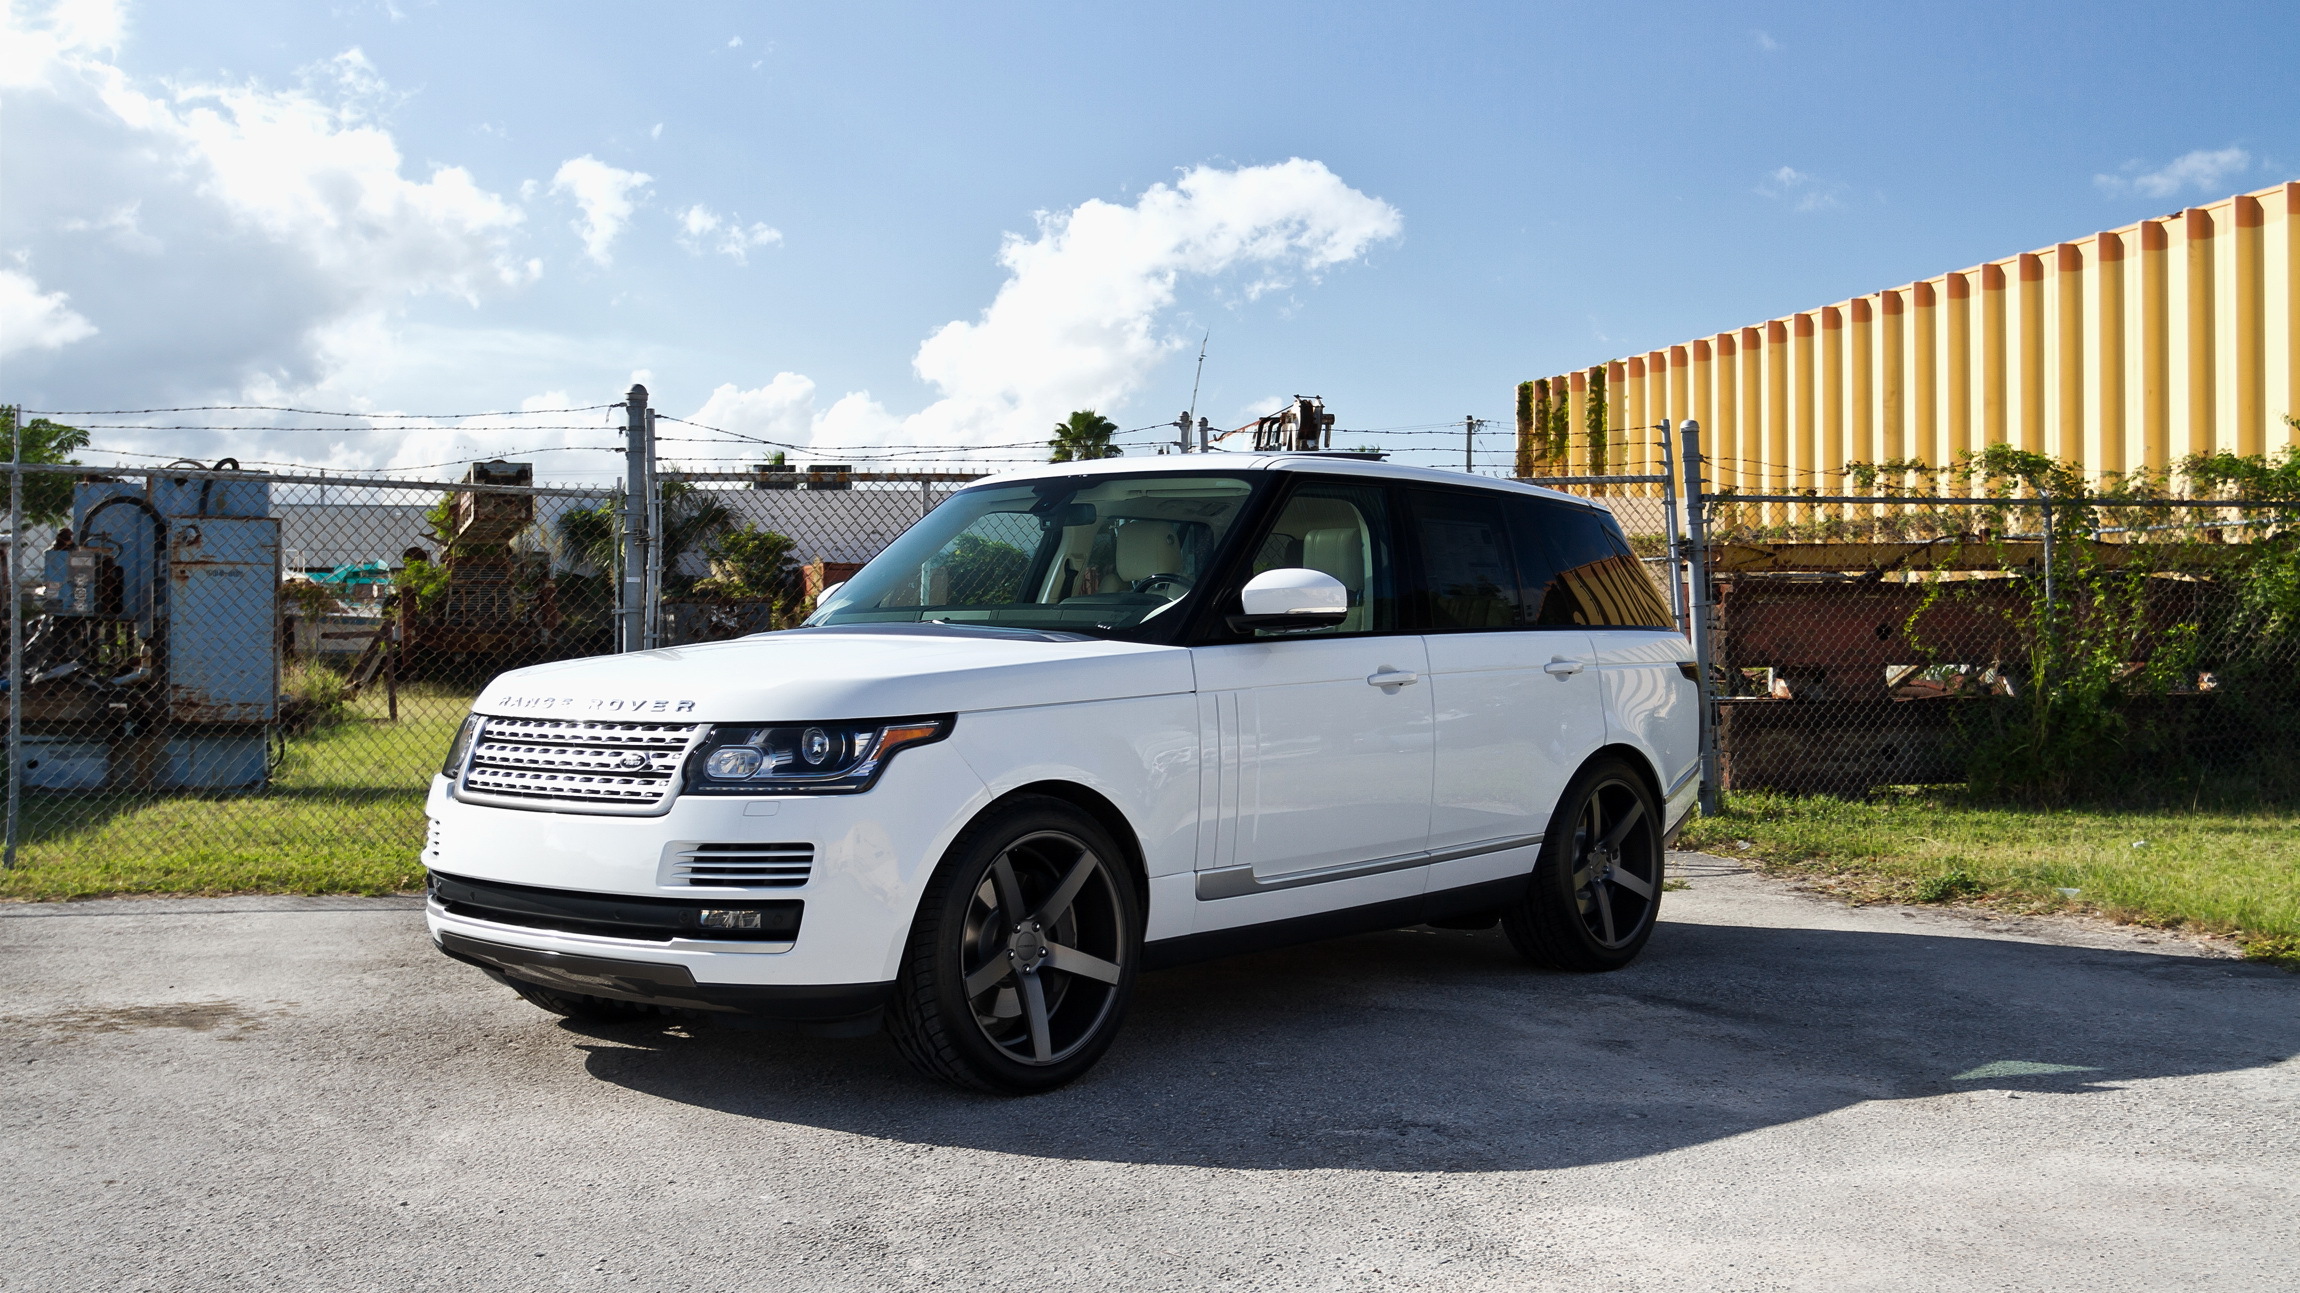 range rover, sports, land rover, cars, white, jeep